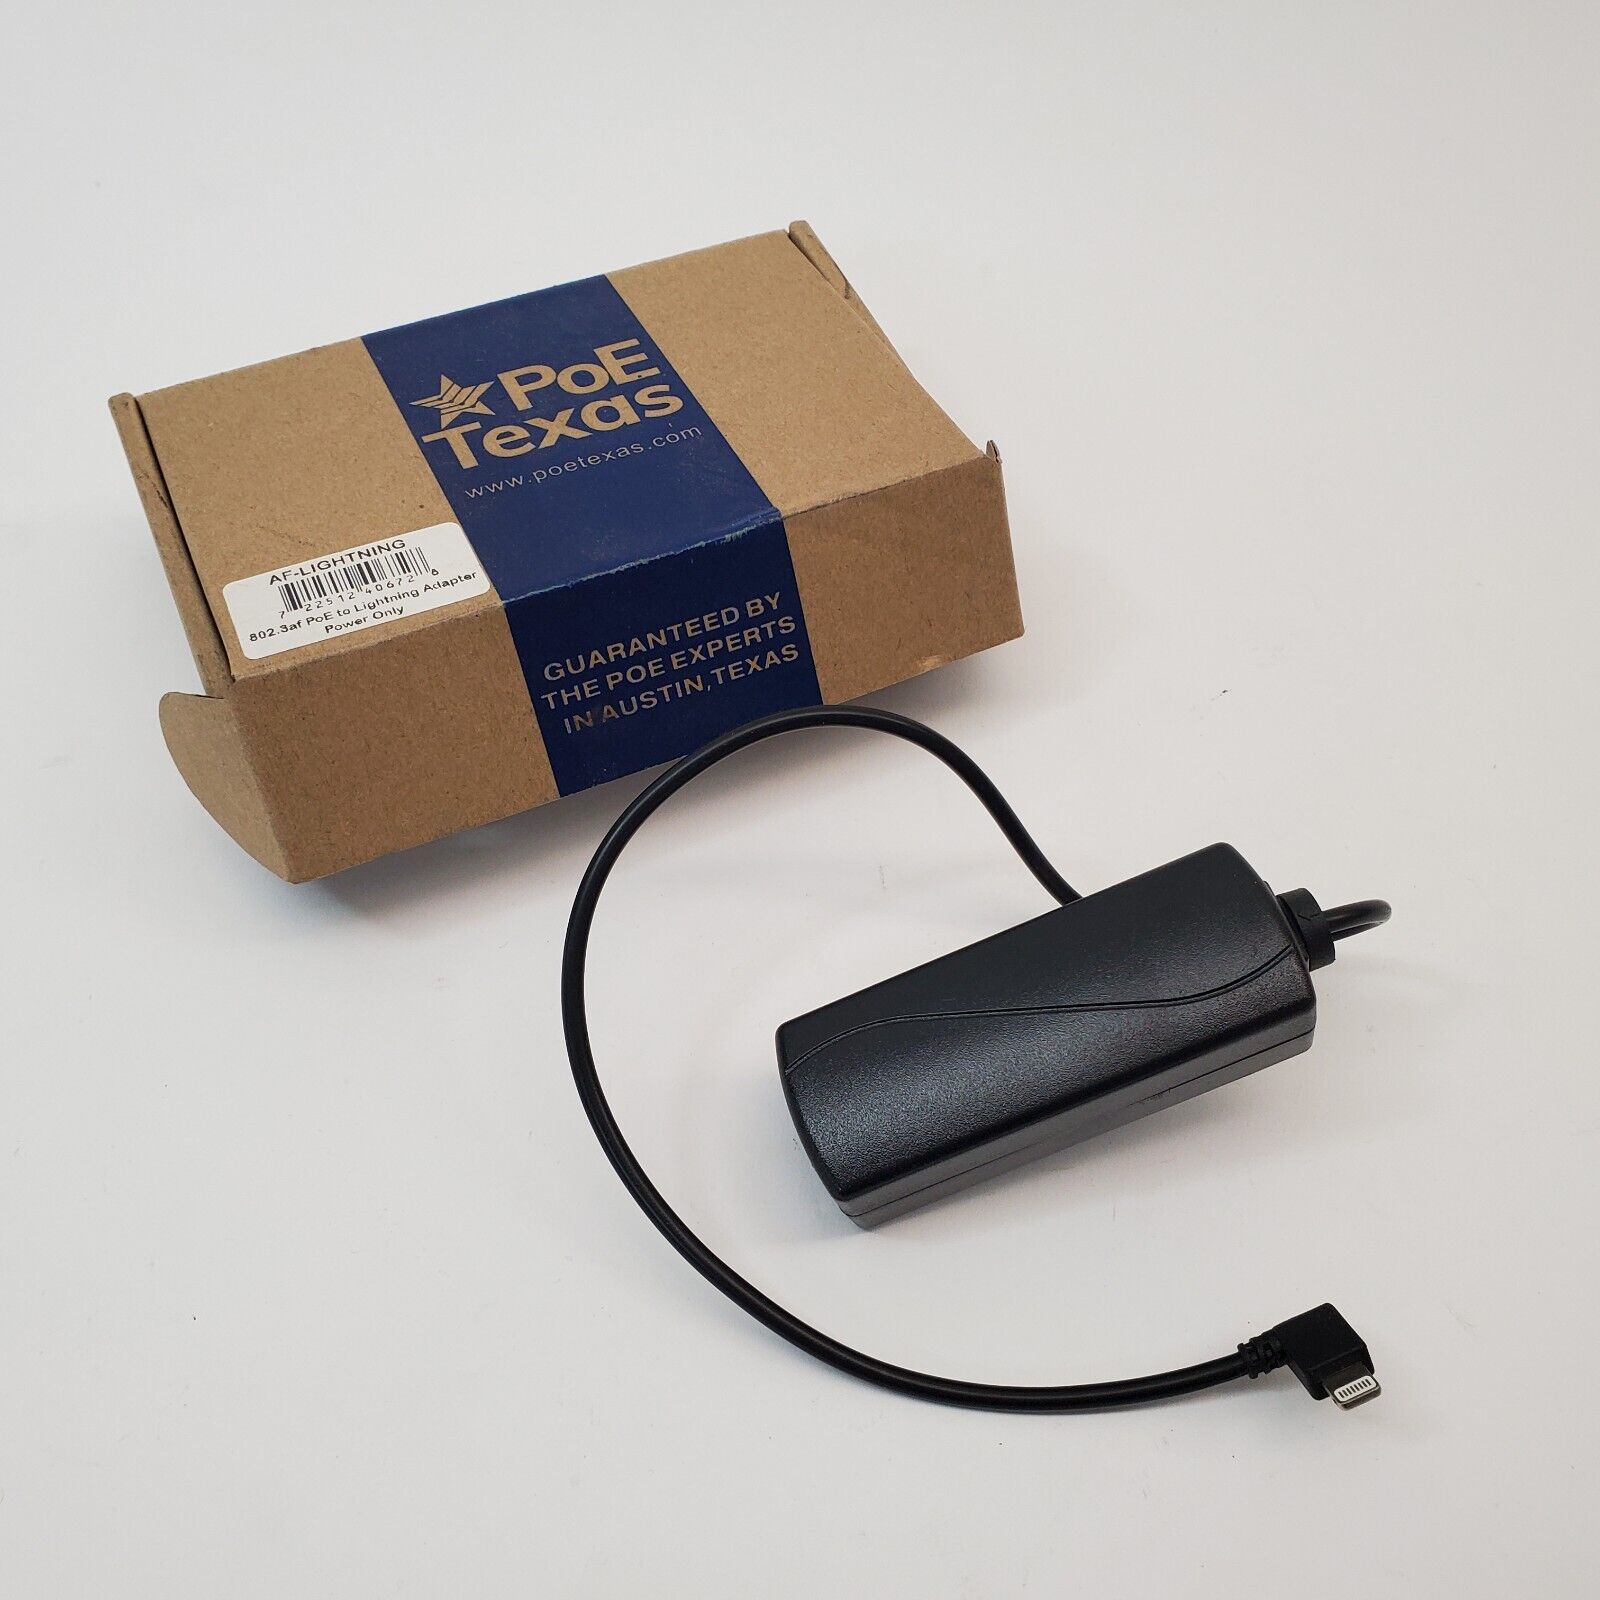 POE Texas AF-Lightning Adapter for Power/Data (PoE to Lightning Power Only) NEW